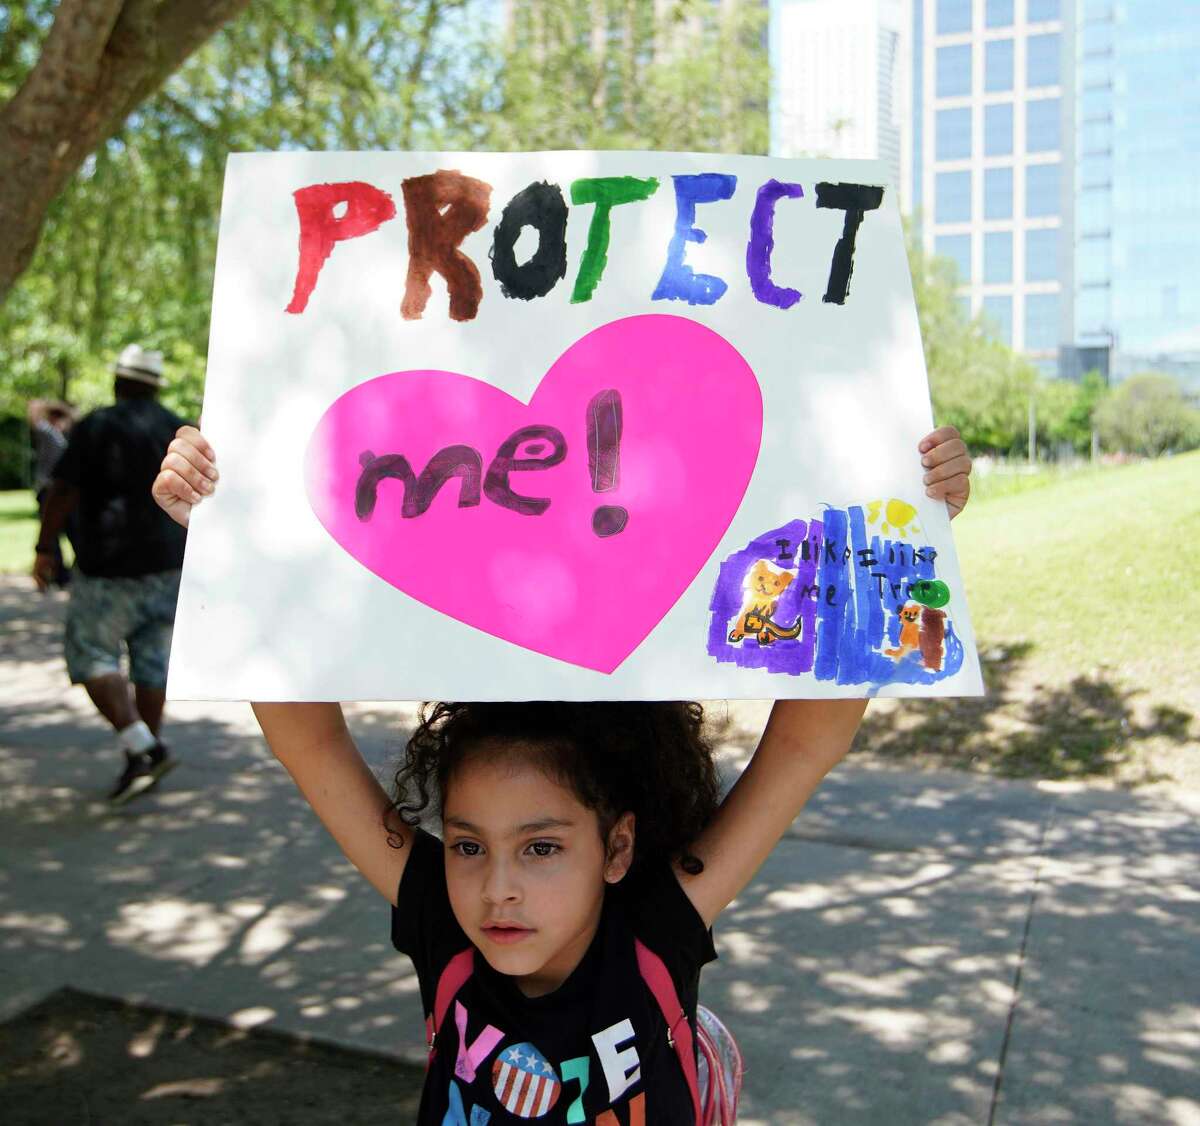 Victoria Vega, 6, holds a sign she made during a protest outside of the NRA Convention in Houston days after the Uvalde Elementary massacre that killed 19 students and two teachers. Will Texas GOP members listen?